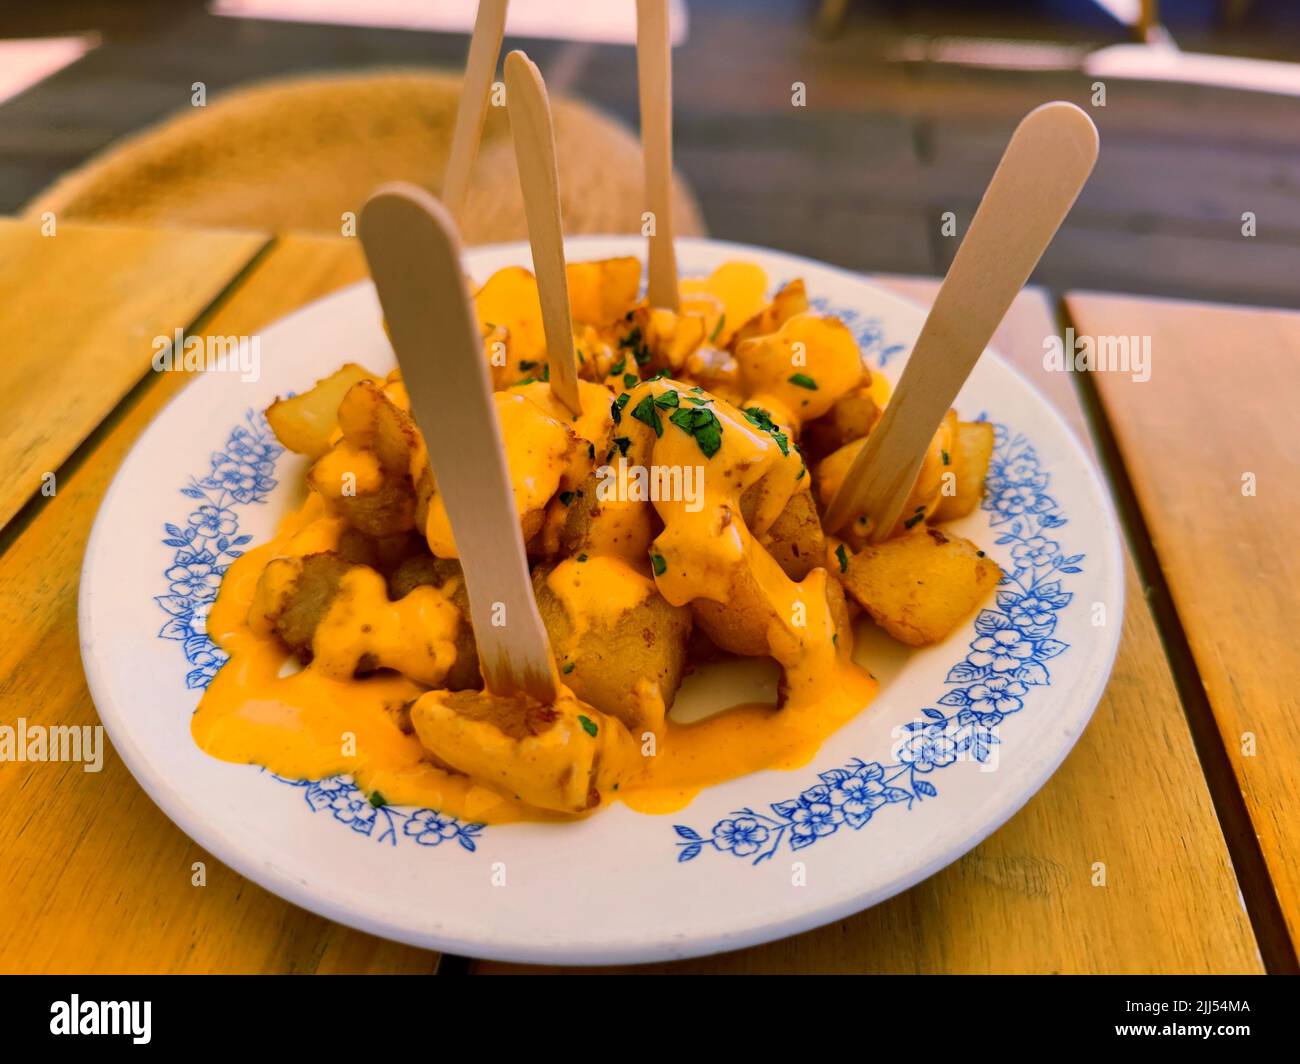 Delicious patatas bravas with spicy yellow traditional sauce served on a white board in a restaurant Stock Photo